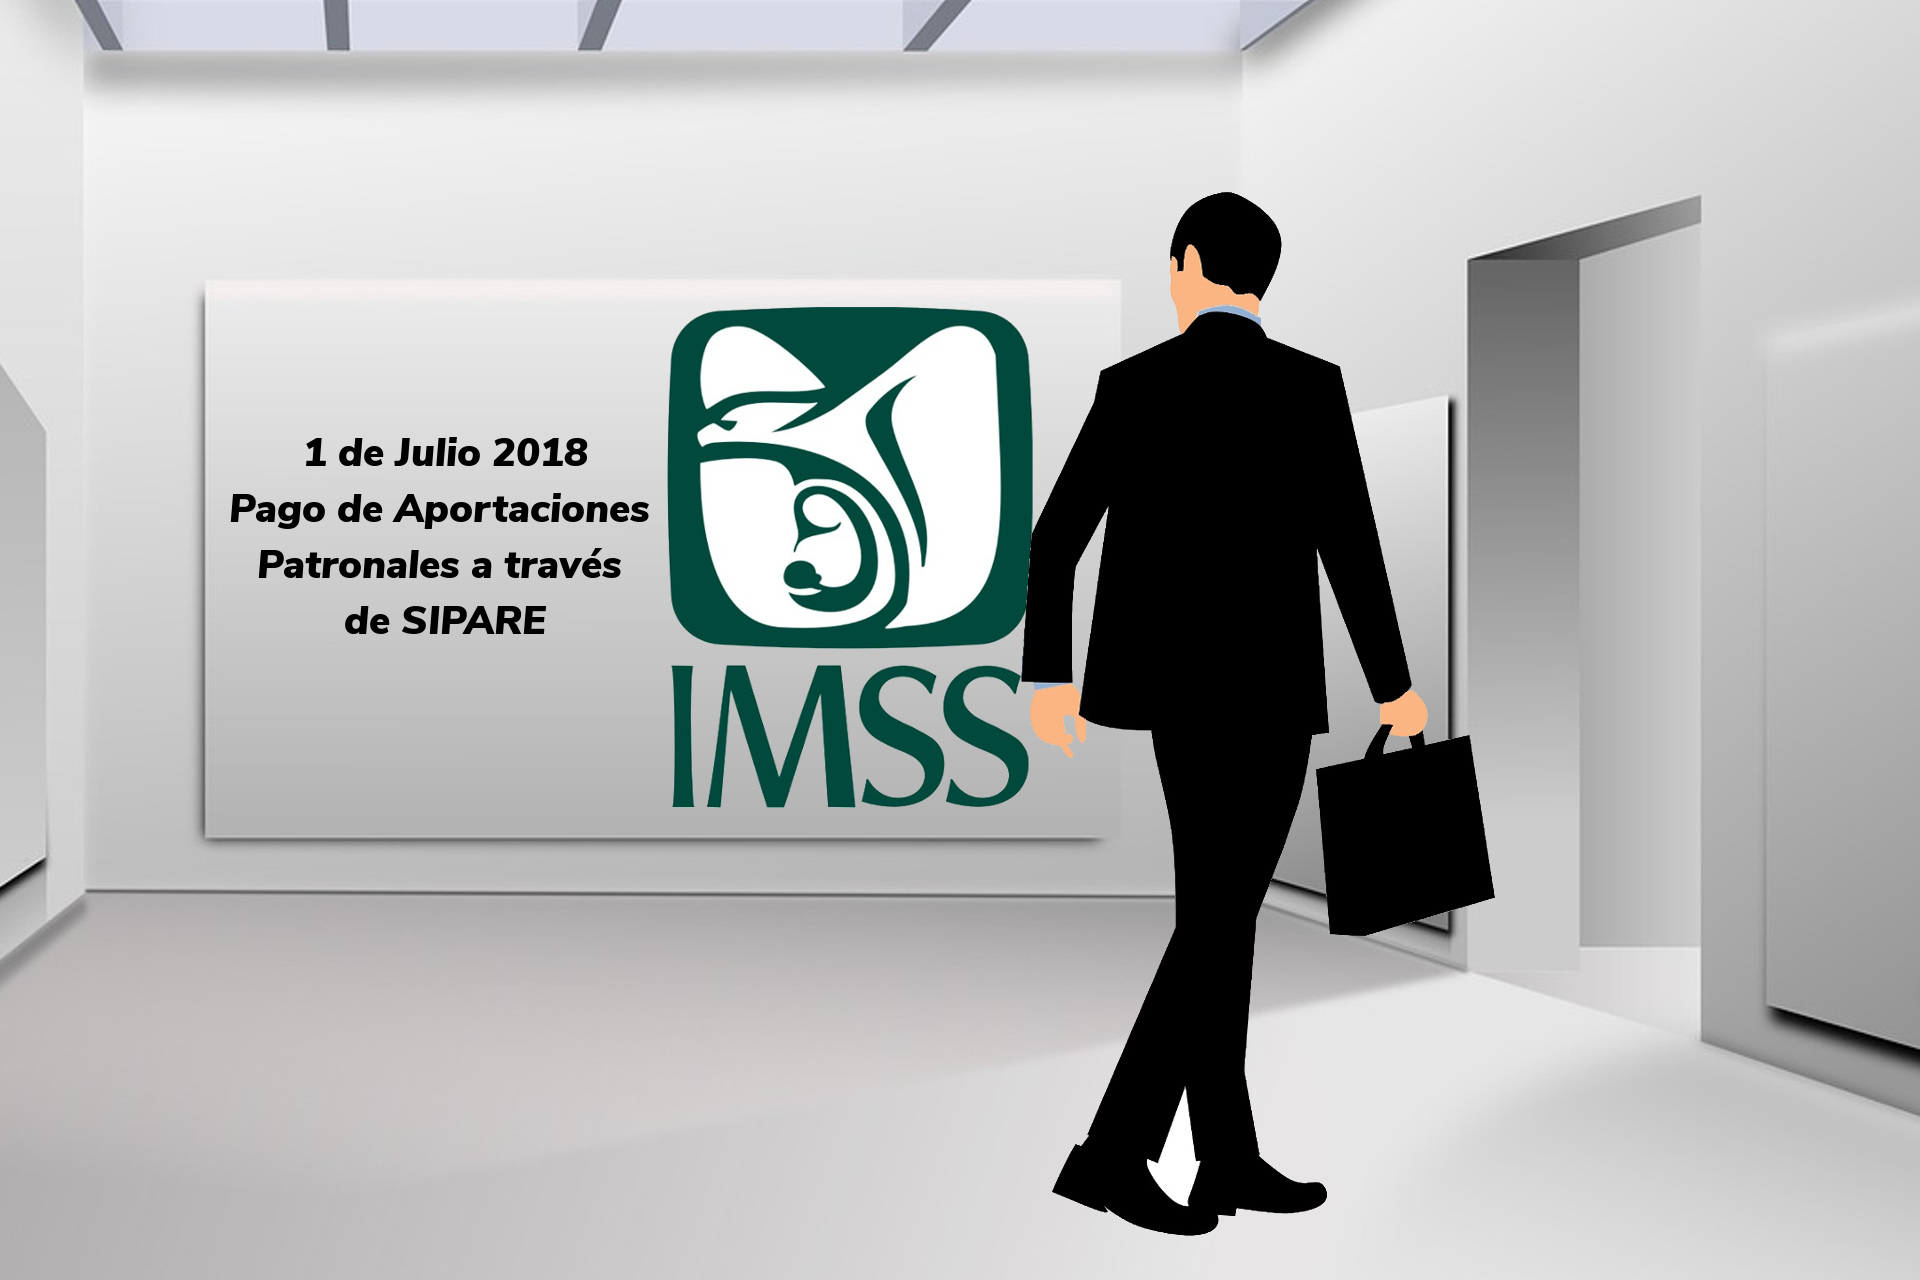 IMSS migrating to SIPARE